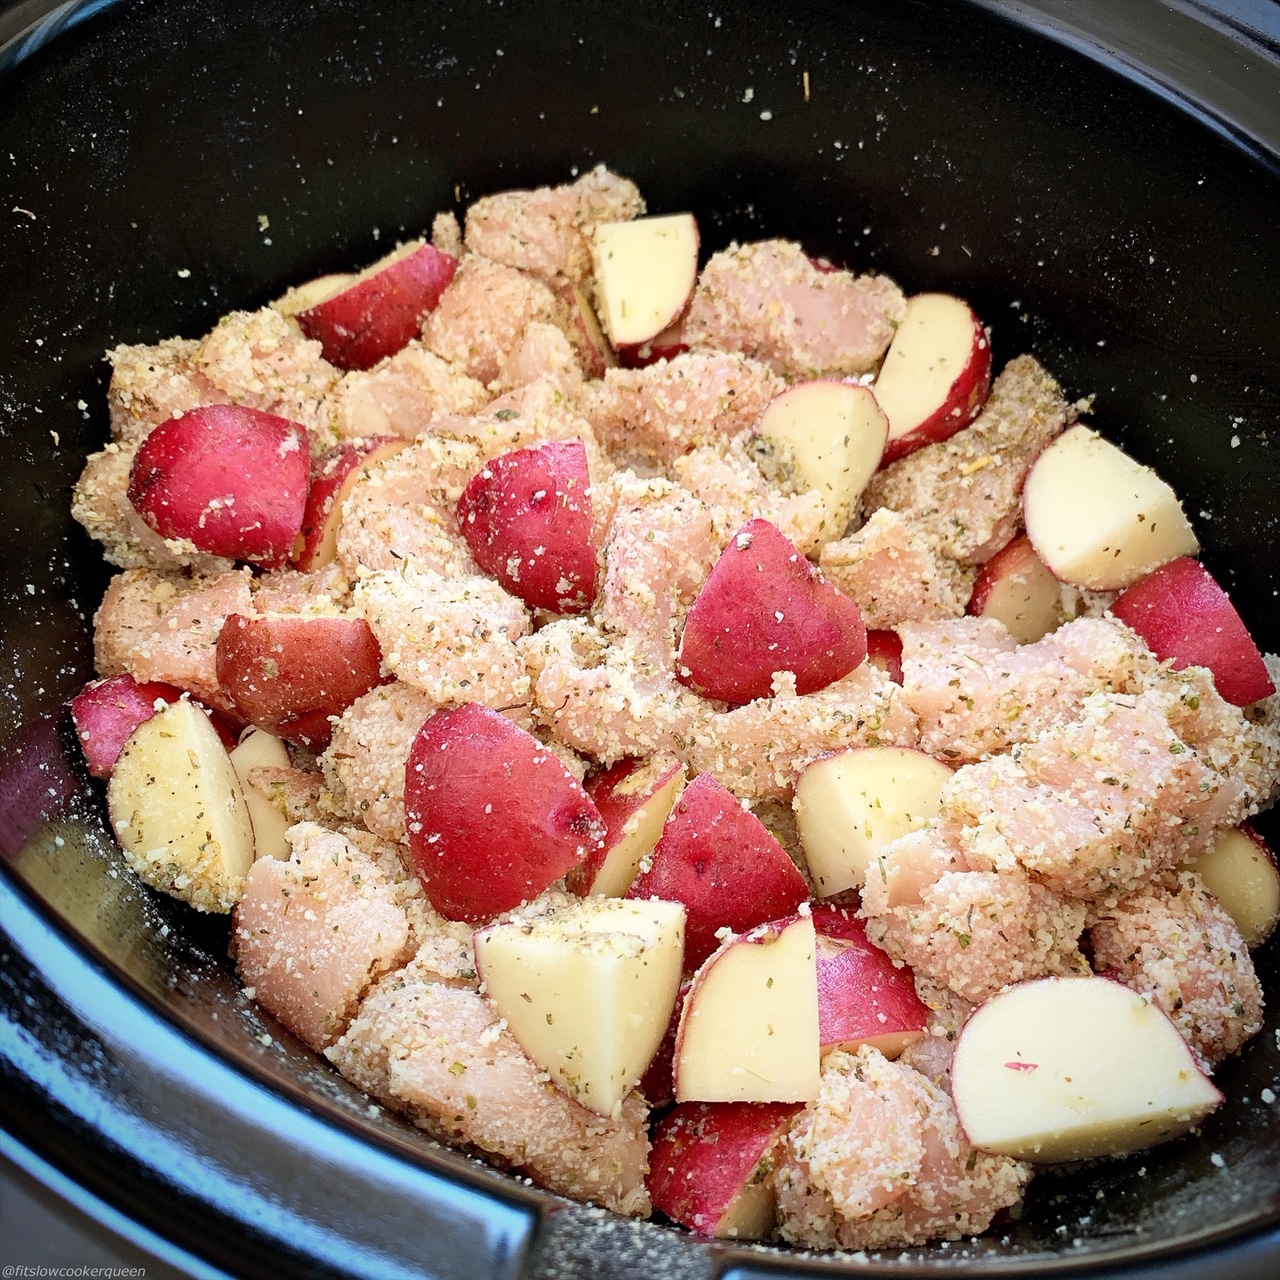 uncooked Garlic Parmesan chicken & potatoes in the slow cooker